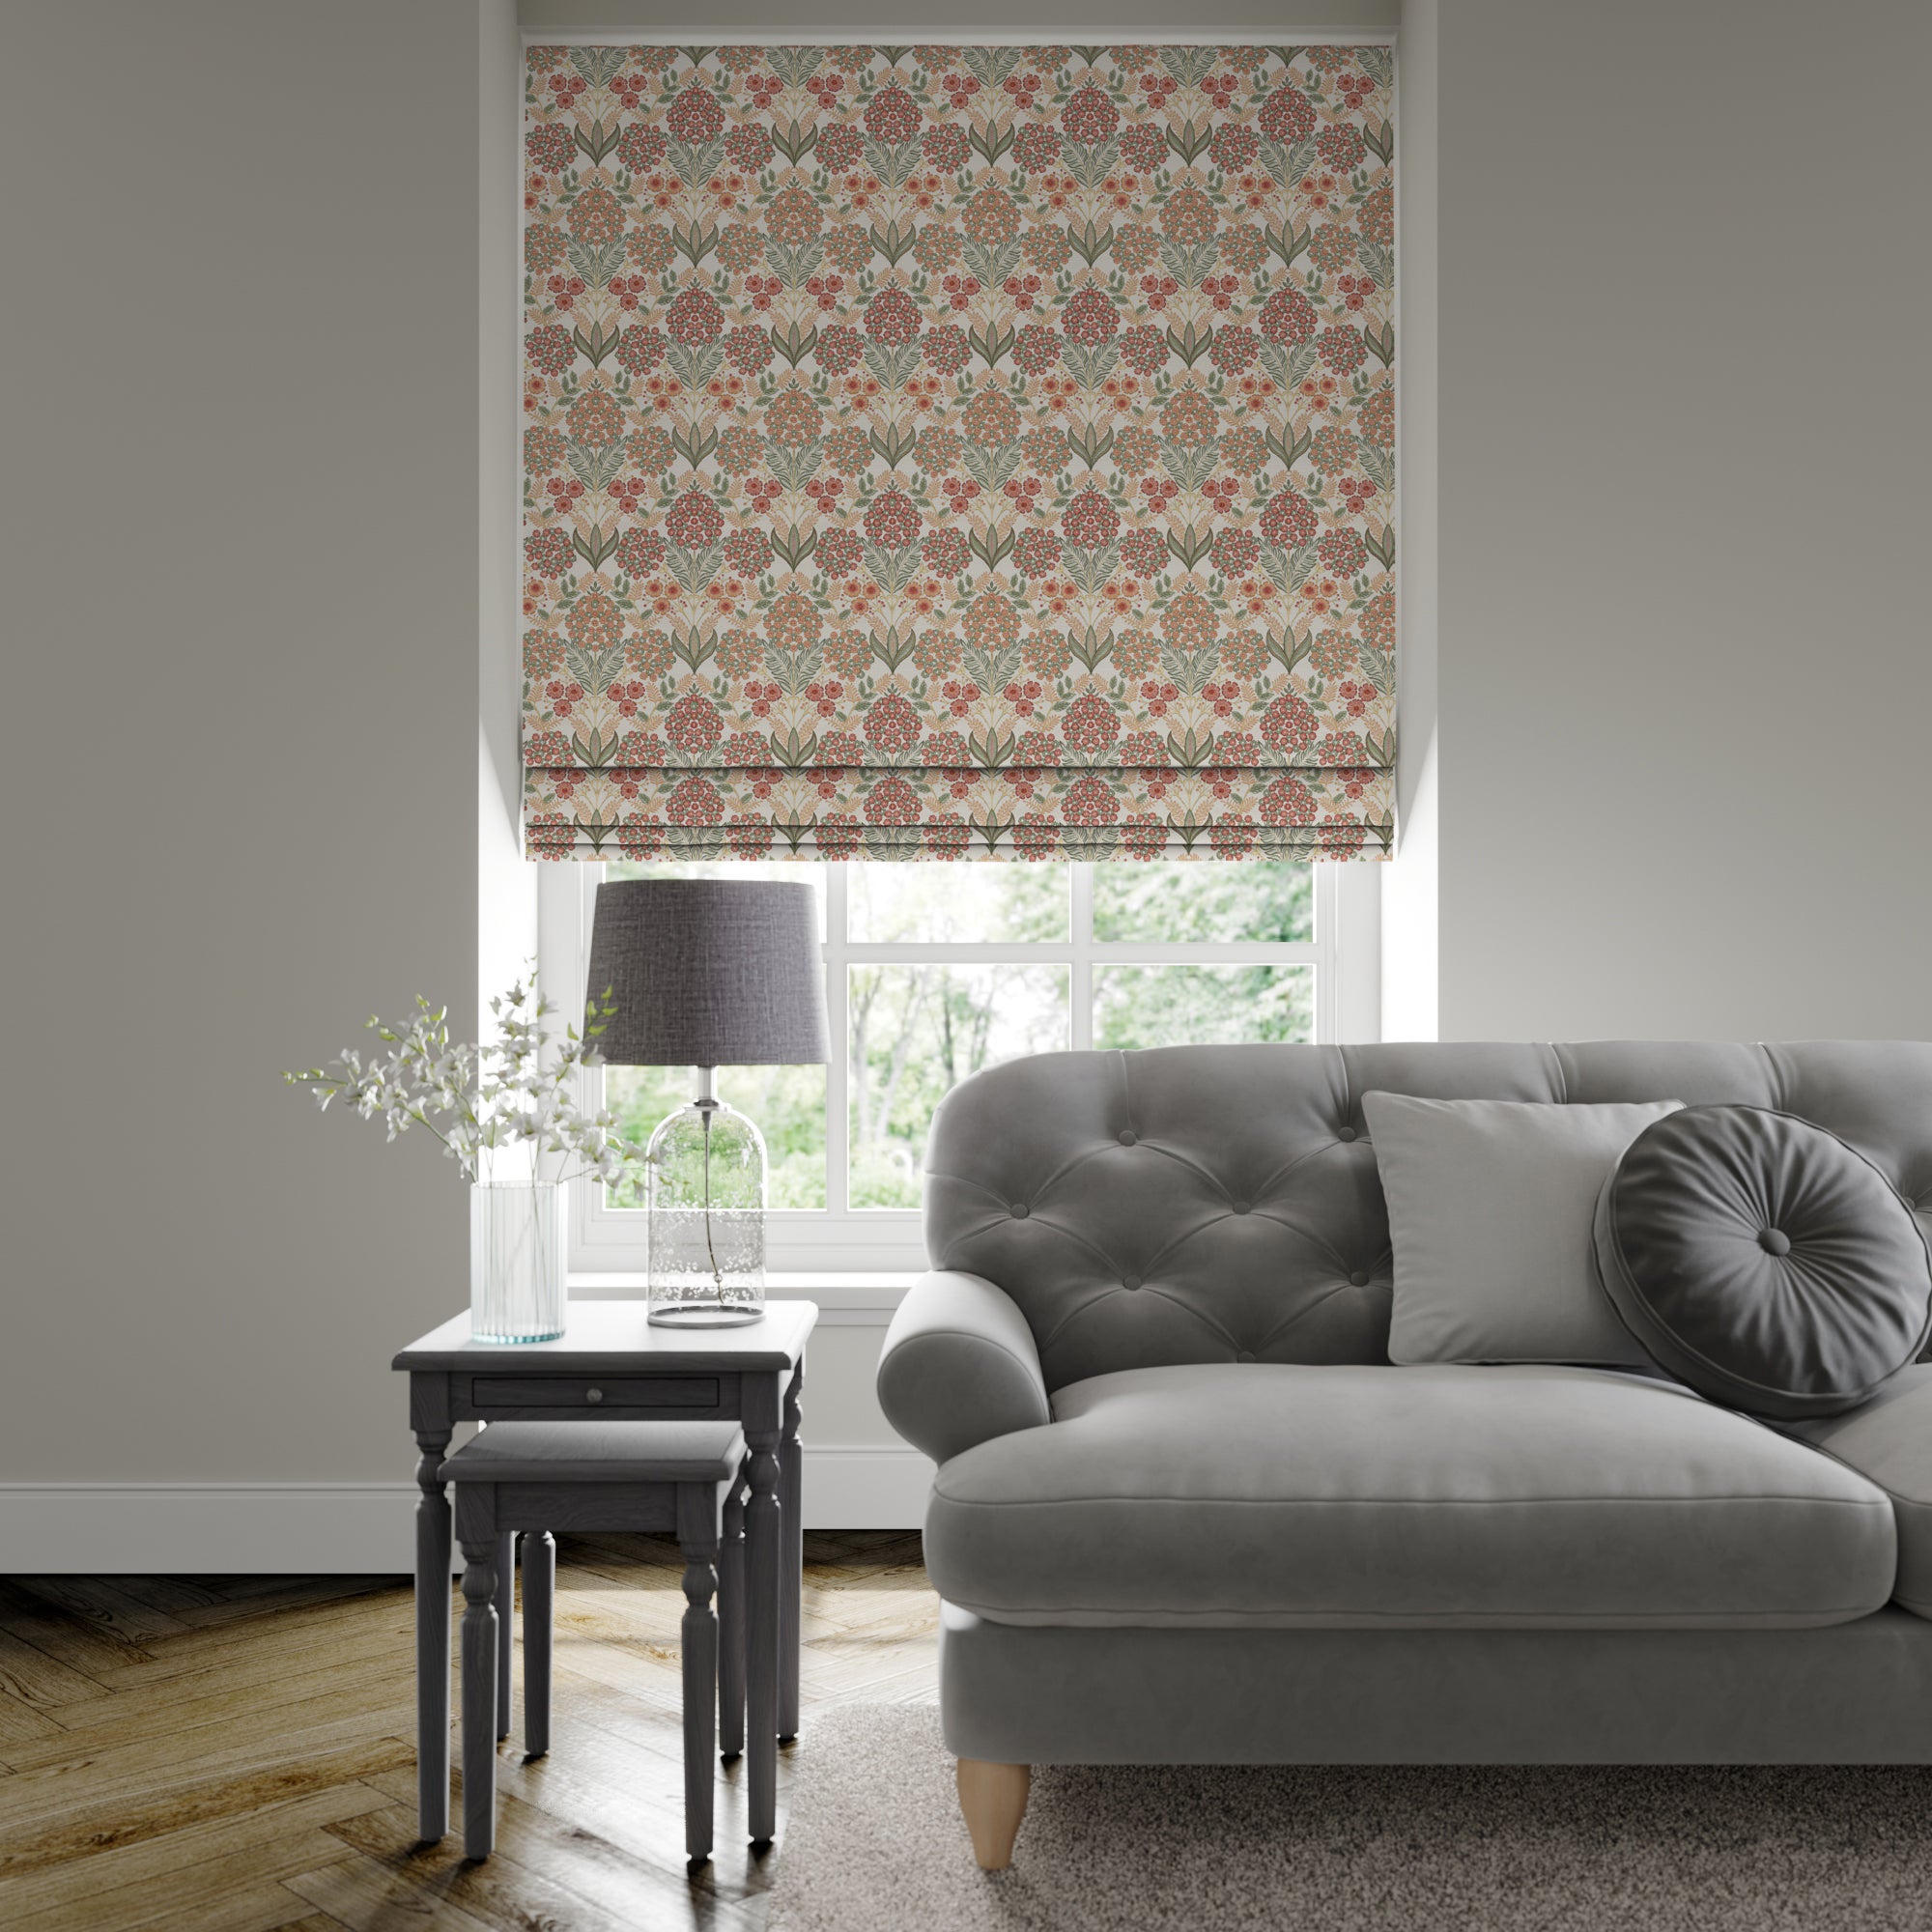 Wilmington Made to Measure Roman Blind Wilmington Spice